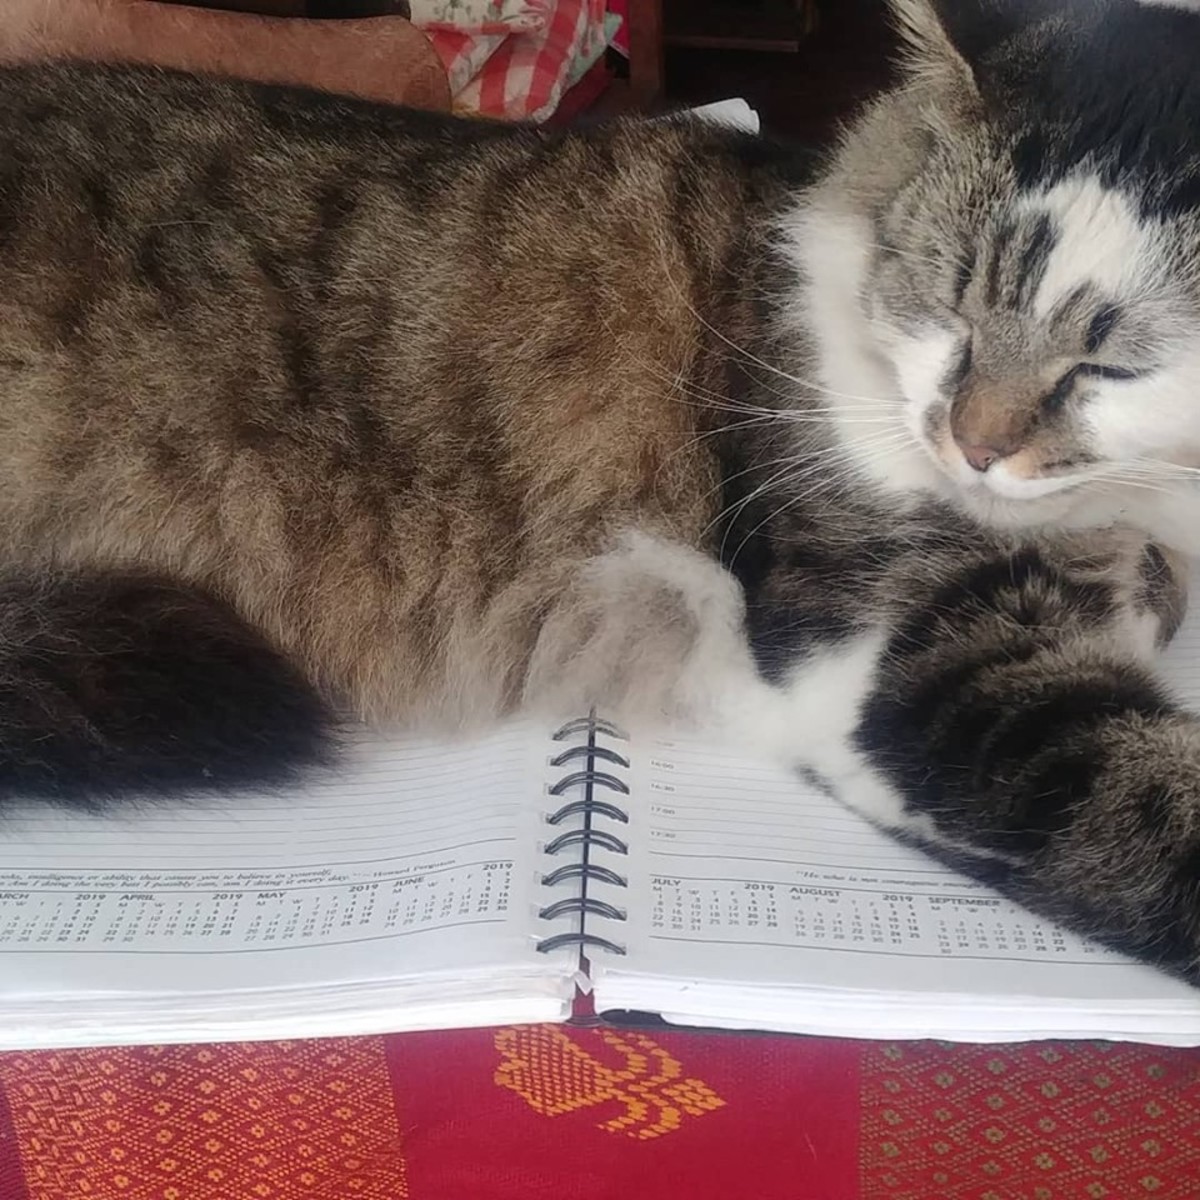 My cat with his very full diary